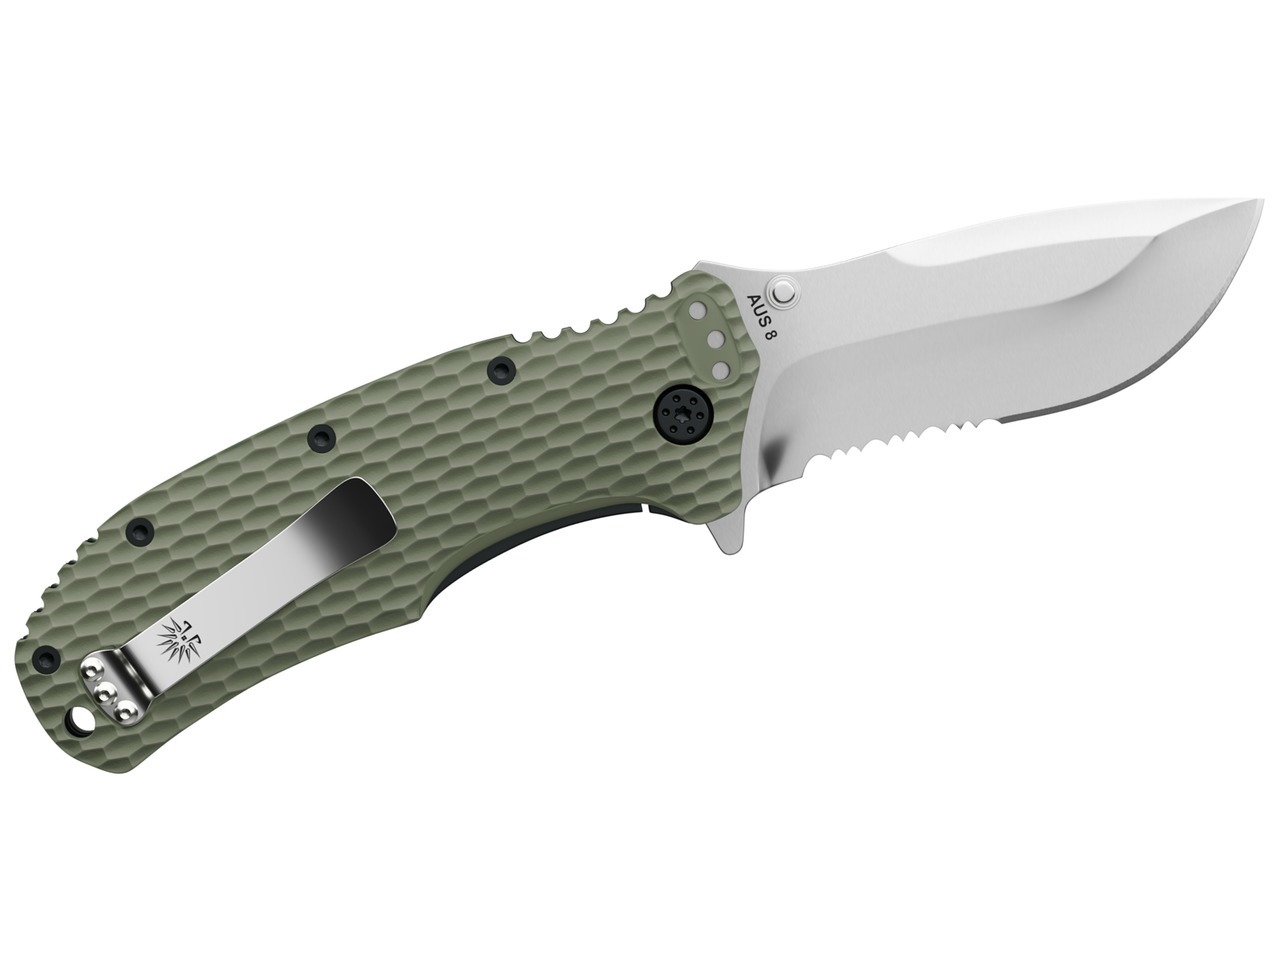 When Do You Consider a Knife Tactical?